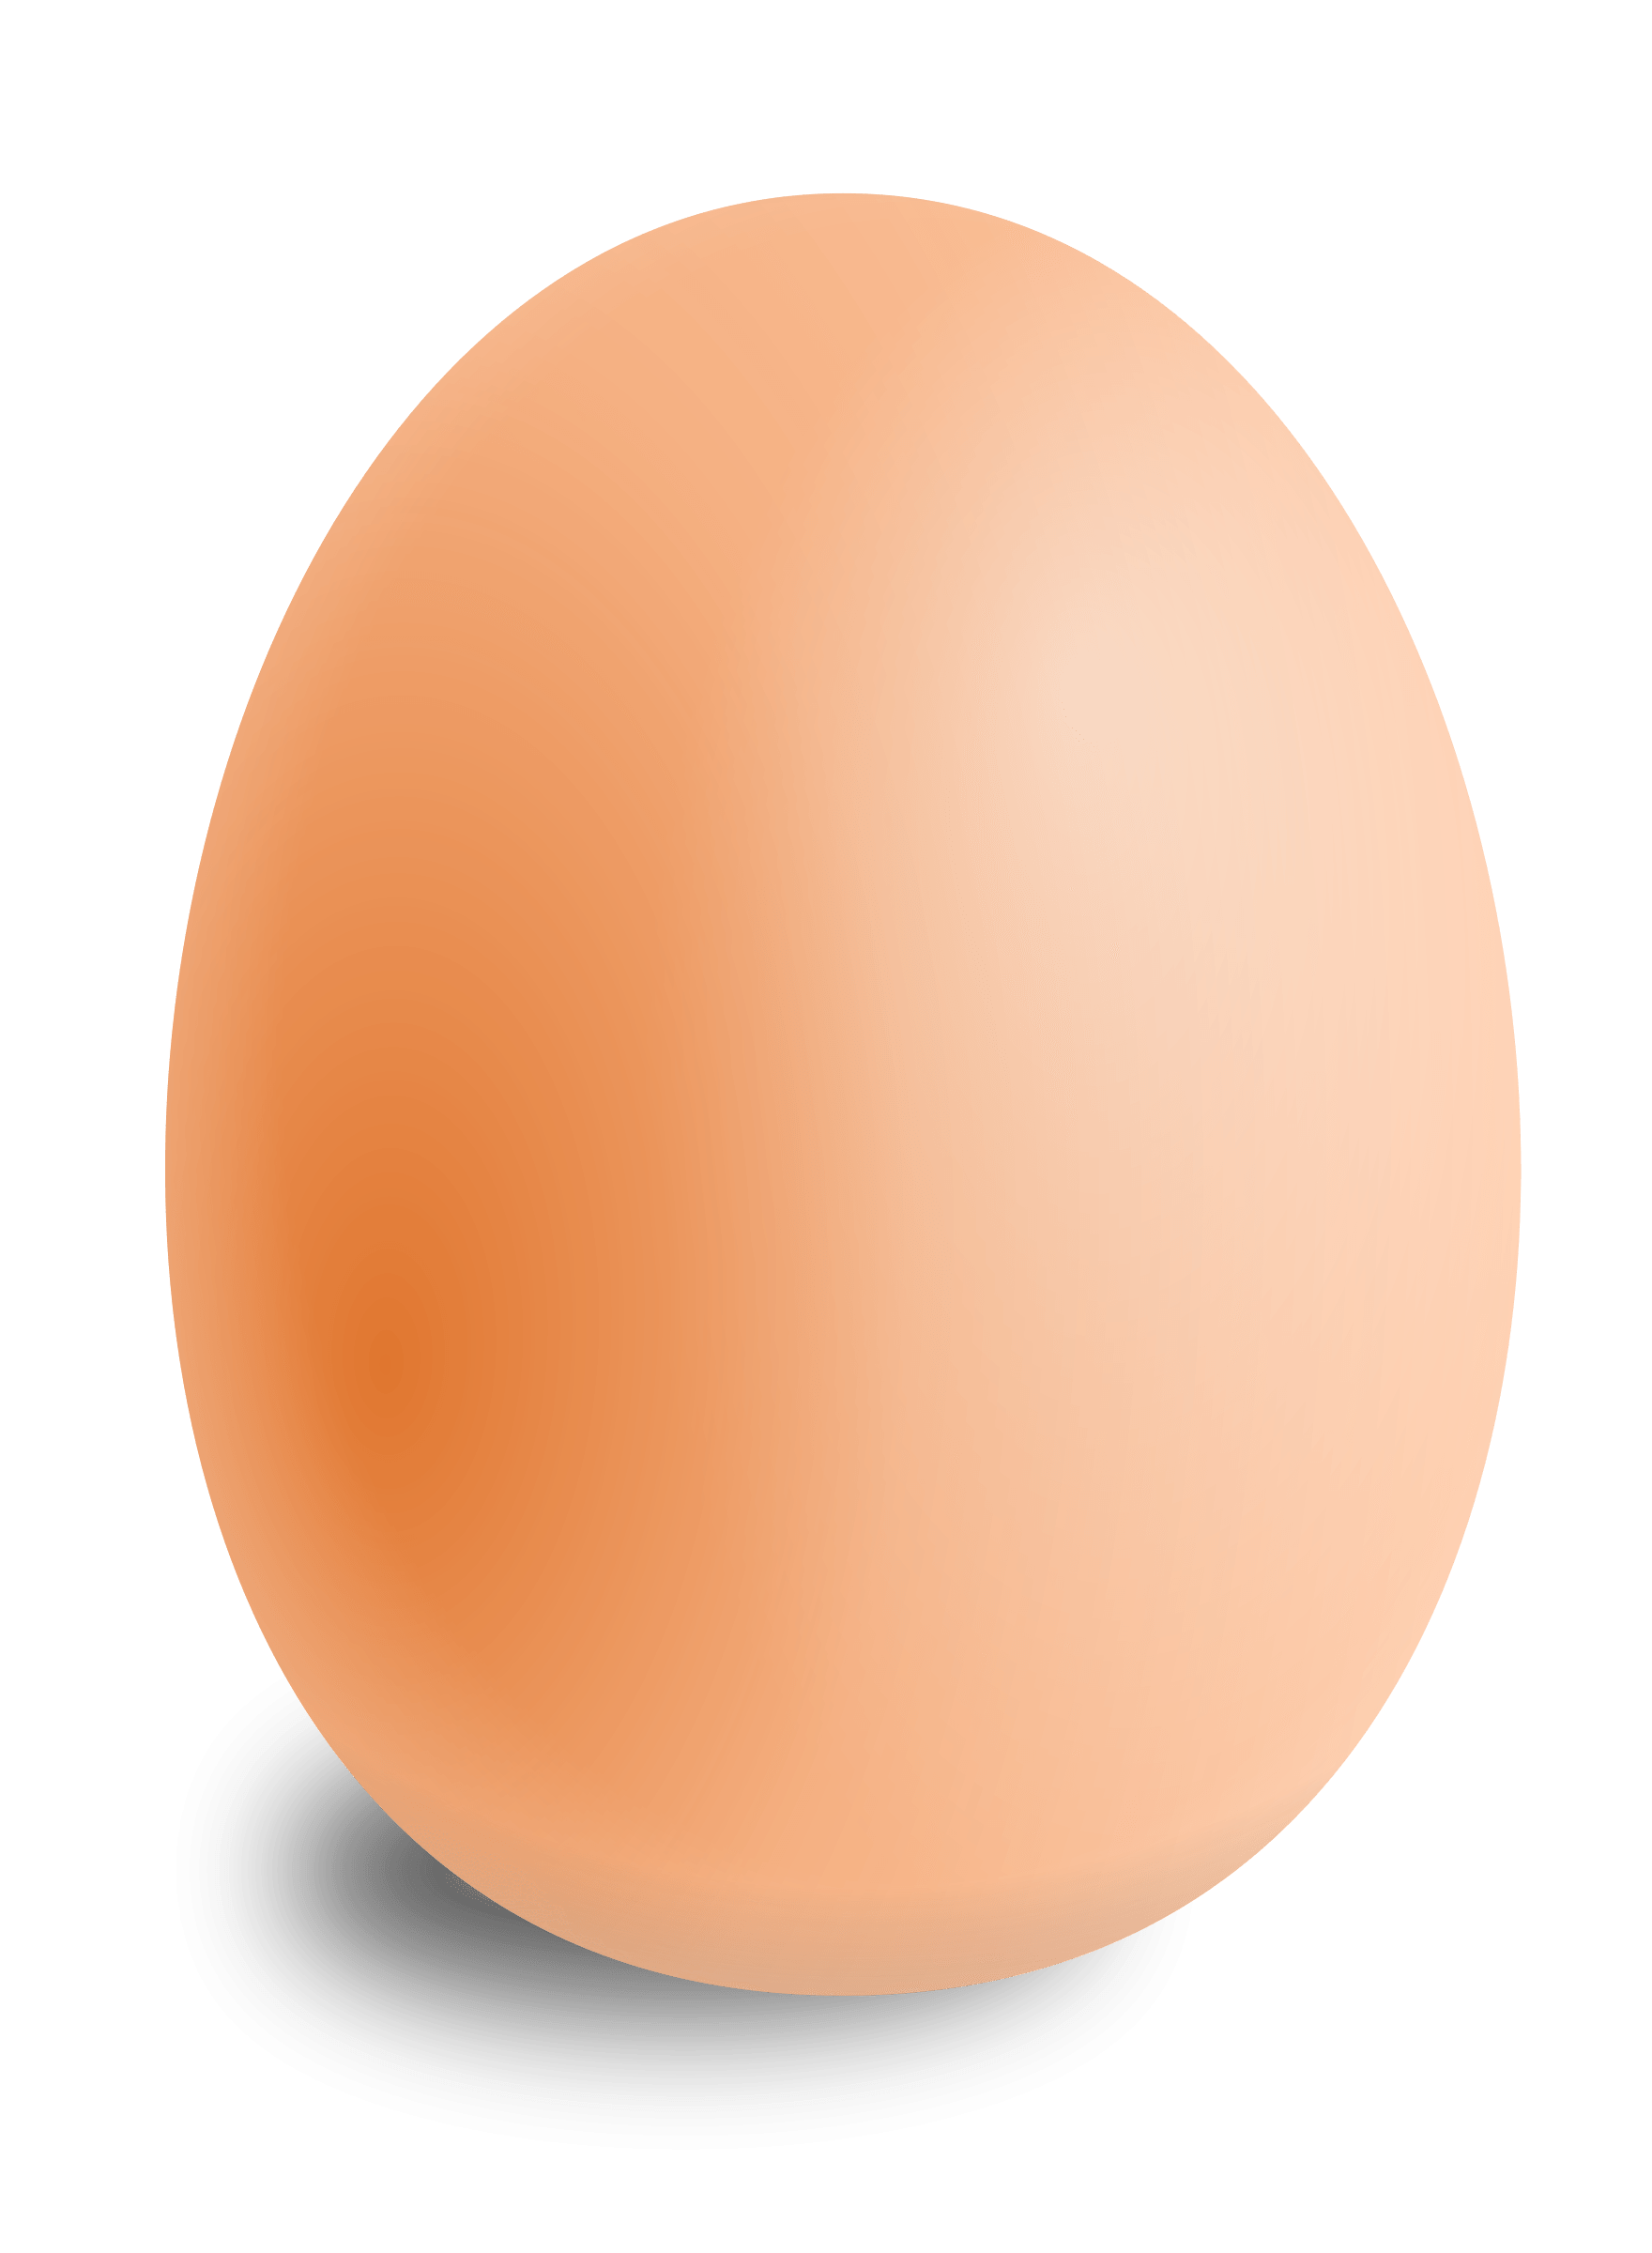 Oval clipart oval egg. Single transparent png stickpng